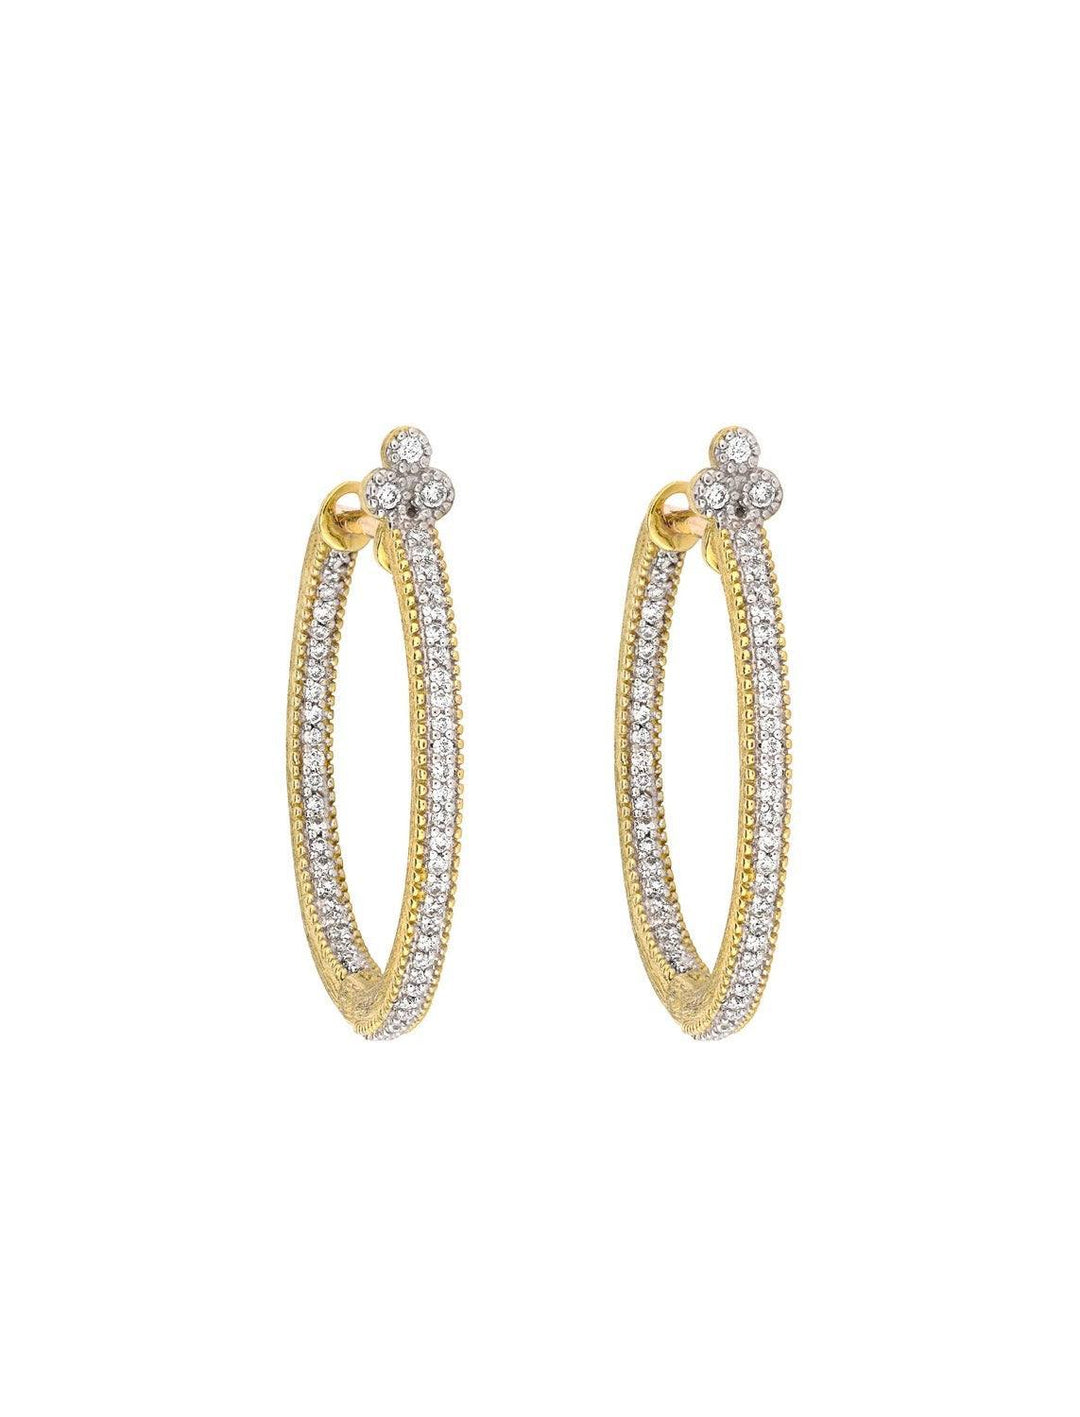 medium provence pave hoop earrings in yellow gold